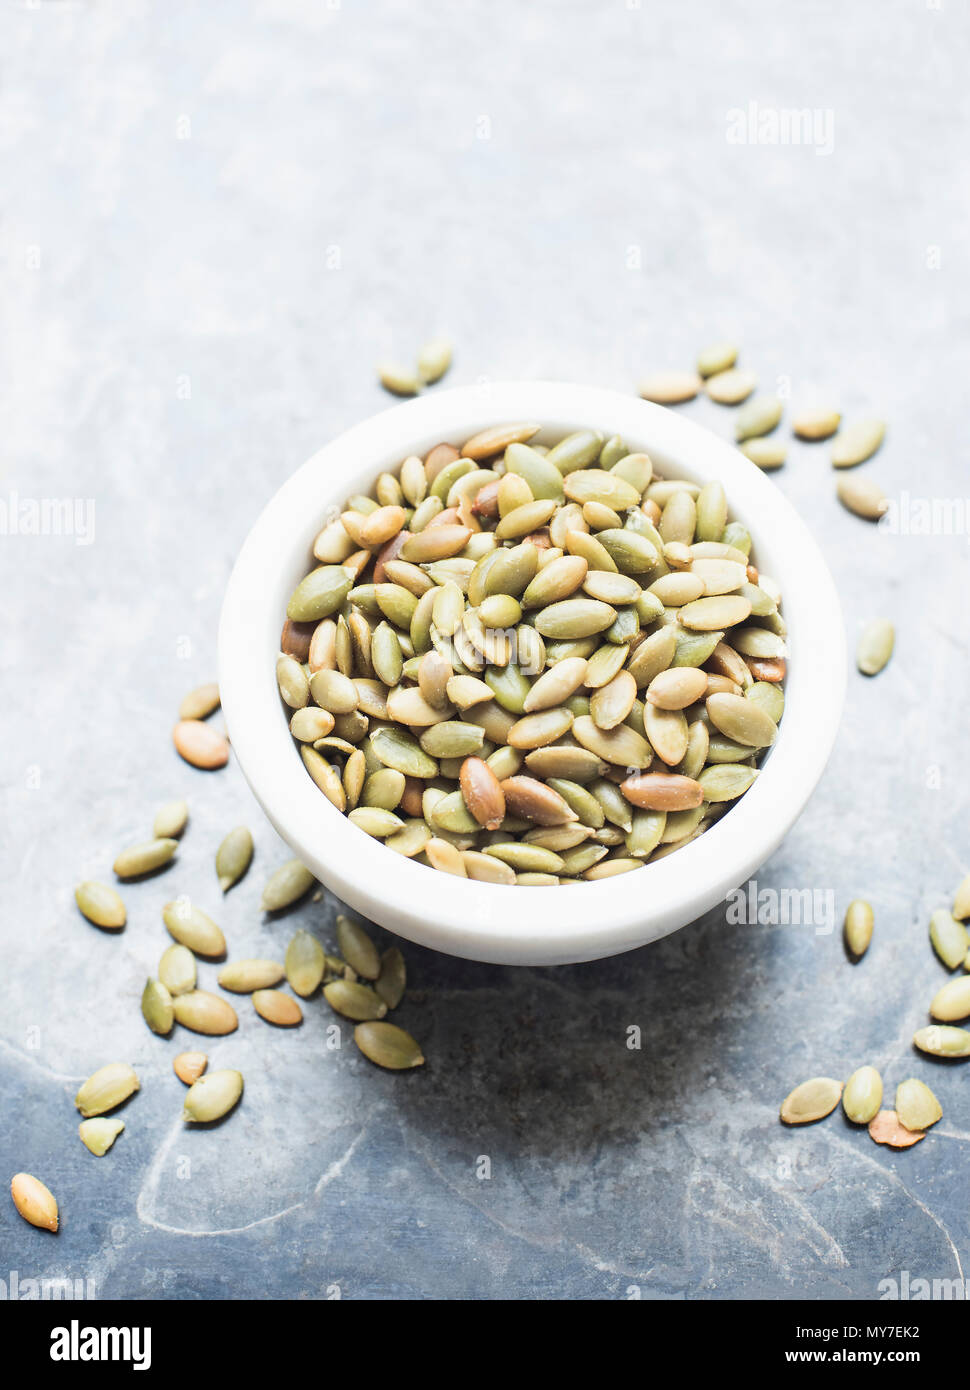 Pumpkin seeds in a bowl, close up overhead view Stock Photo